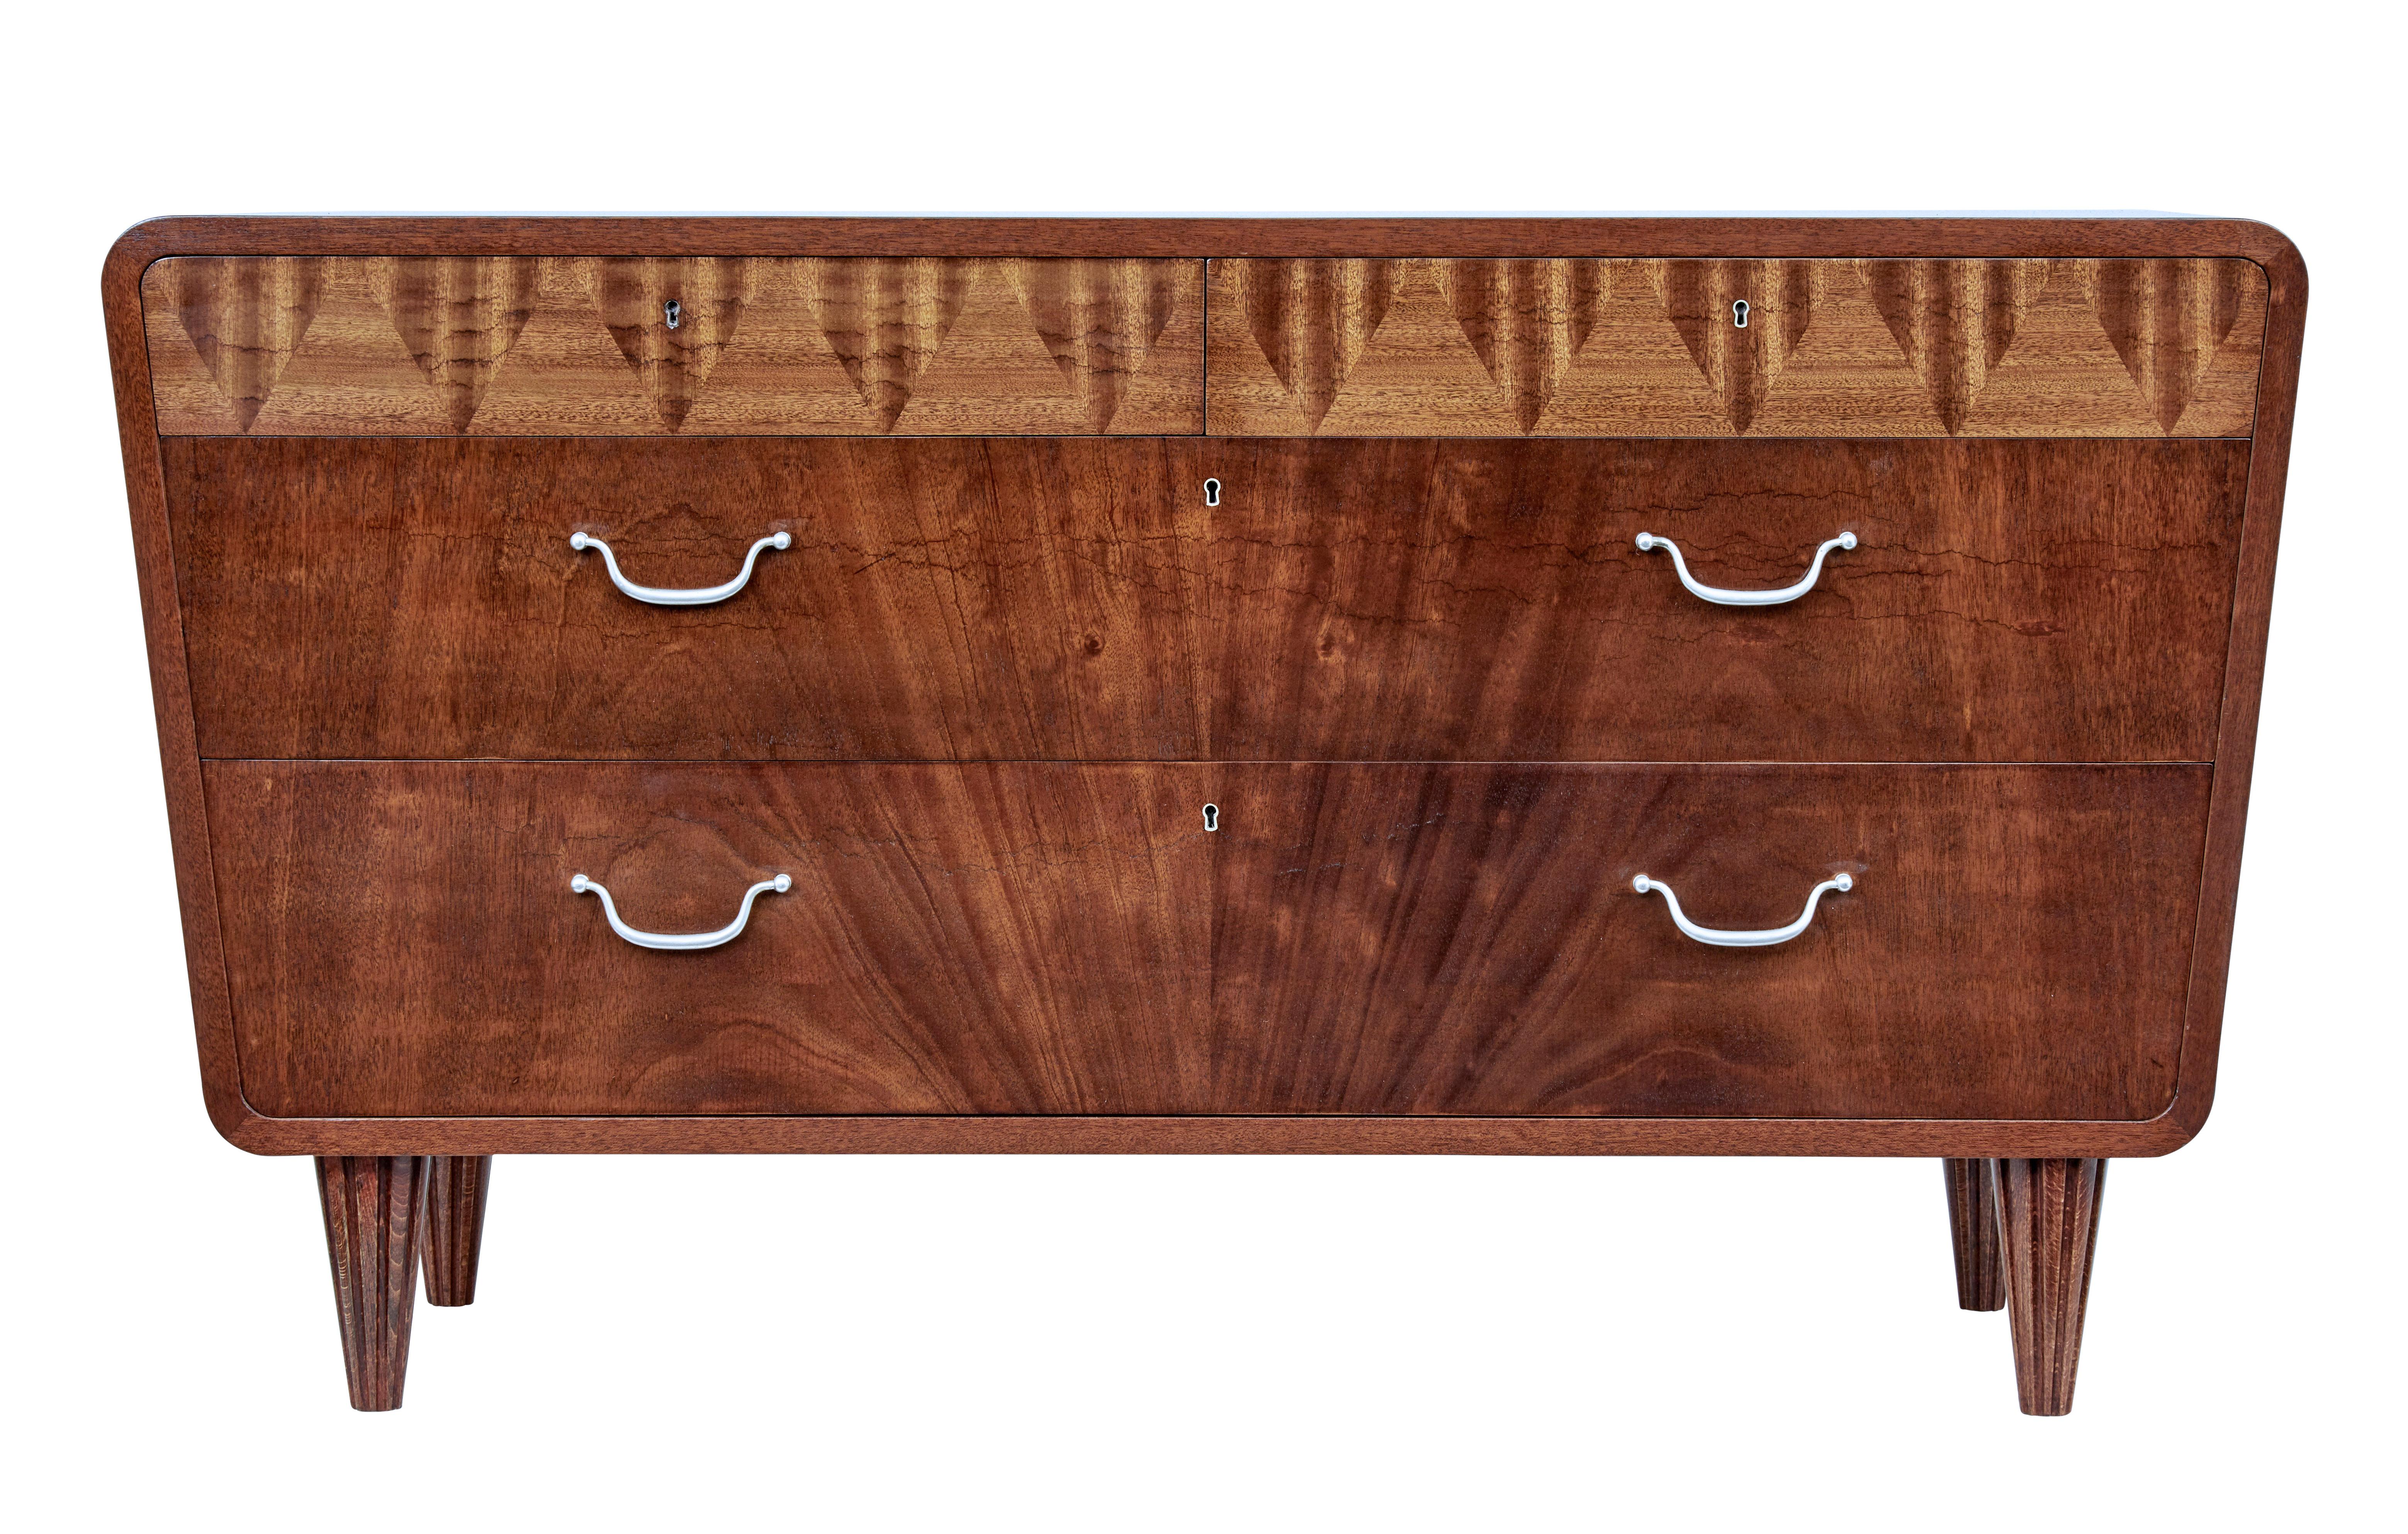 Mid-20th century Scandinavian Modern mahogany chest of drawers, circa 1950.

Stunning shaped chest of drawers very much in the Art Deco taste. 2 drawers below the top with a further 2 drawers below.

Top drawers with patterned veneer which open